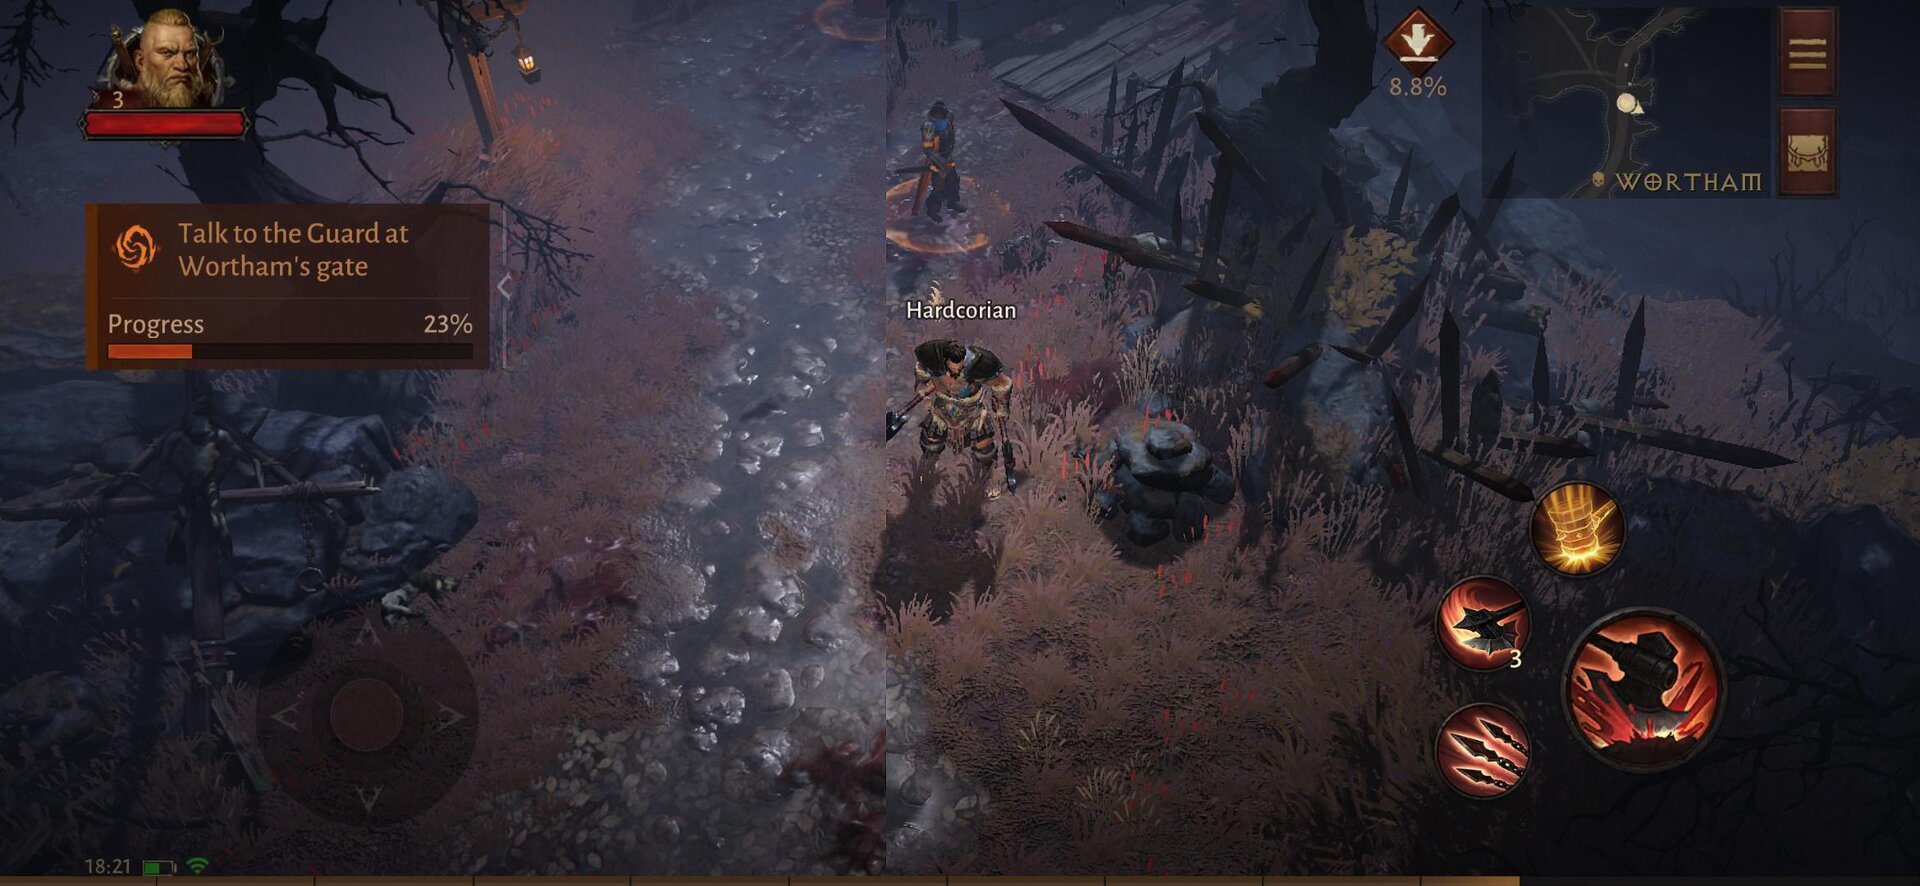 Graphics issues in Diablo Immortal on Samsung smartphones with Exynos APU